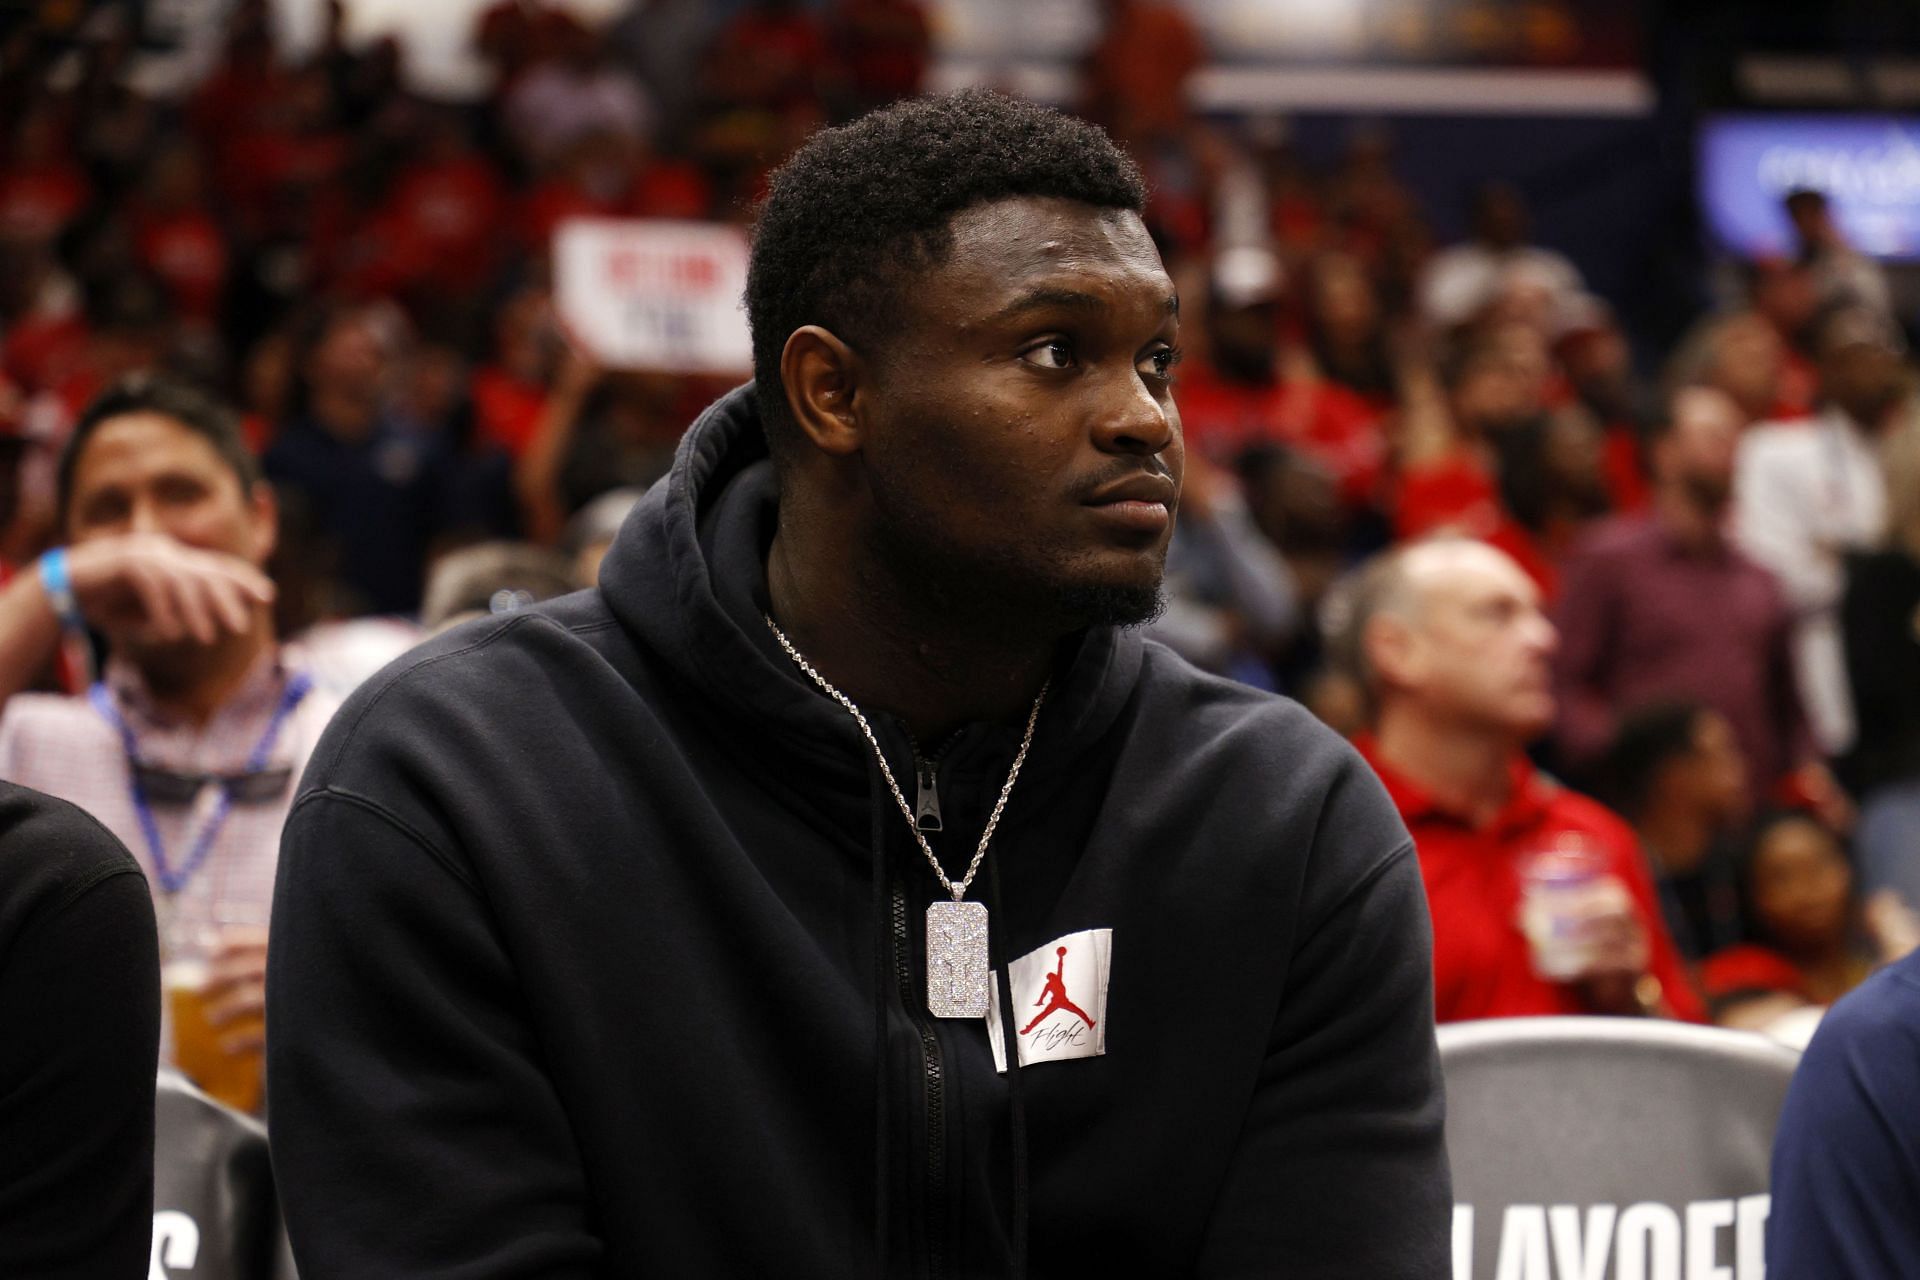 Zion Williamson watching Game 6 of Western Conference playoffs series between the &lt;a href=&#039;https://www.sportskeeda.com/basketball/phoenix-suns&#039; target=&#039;_blank&#039; rel=&#039;noopener noreferrer&#039;&gt;Phoenix Suns&lt;/a&gt; and New Orleans Pelicans.